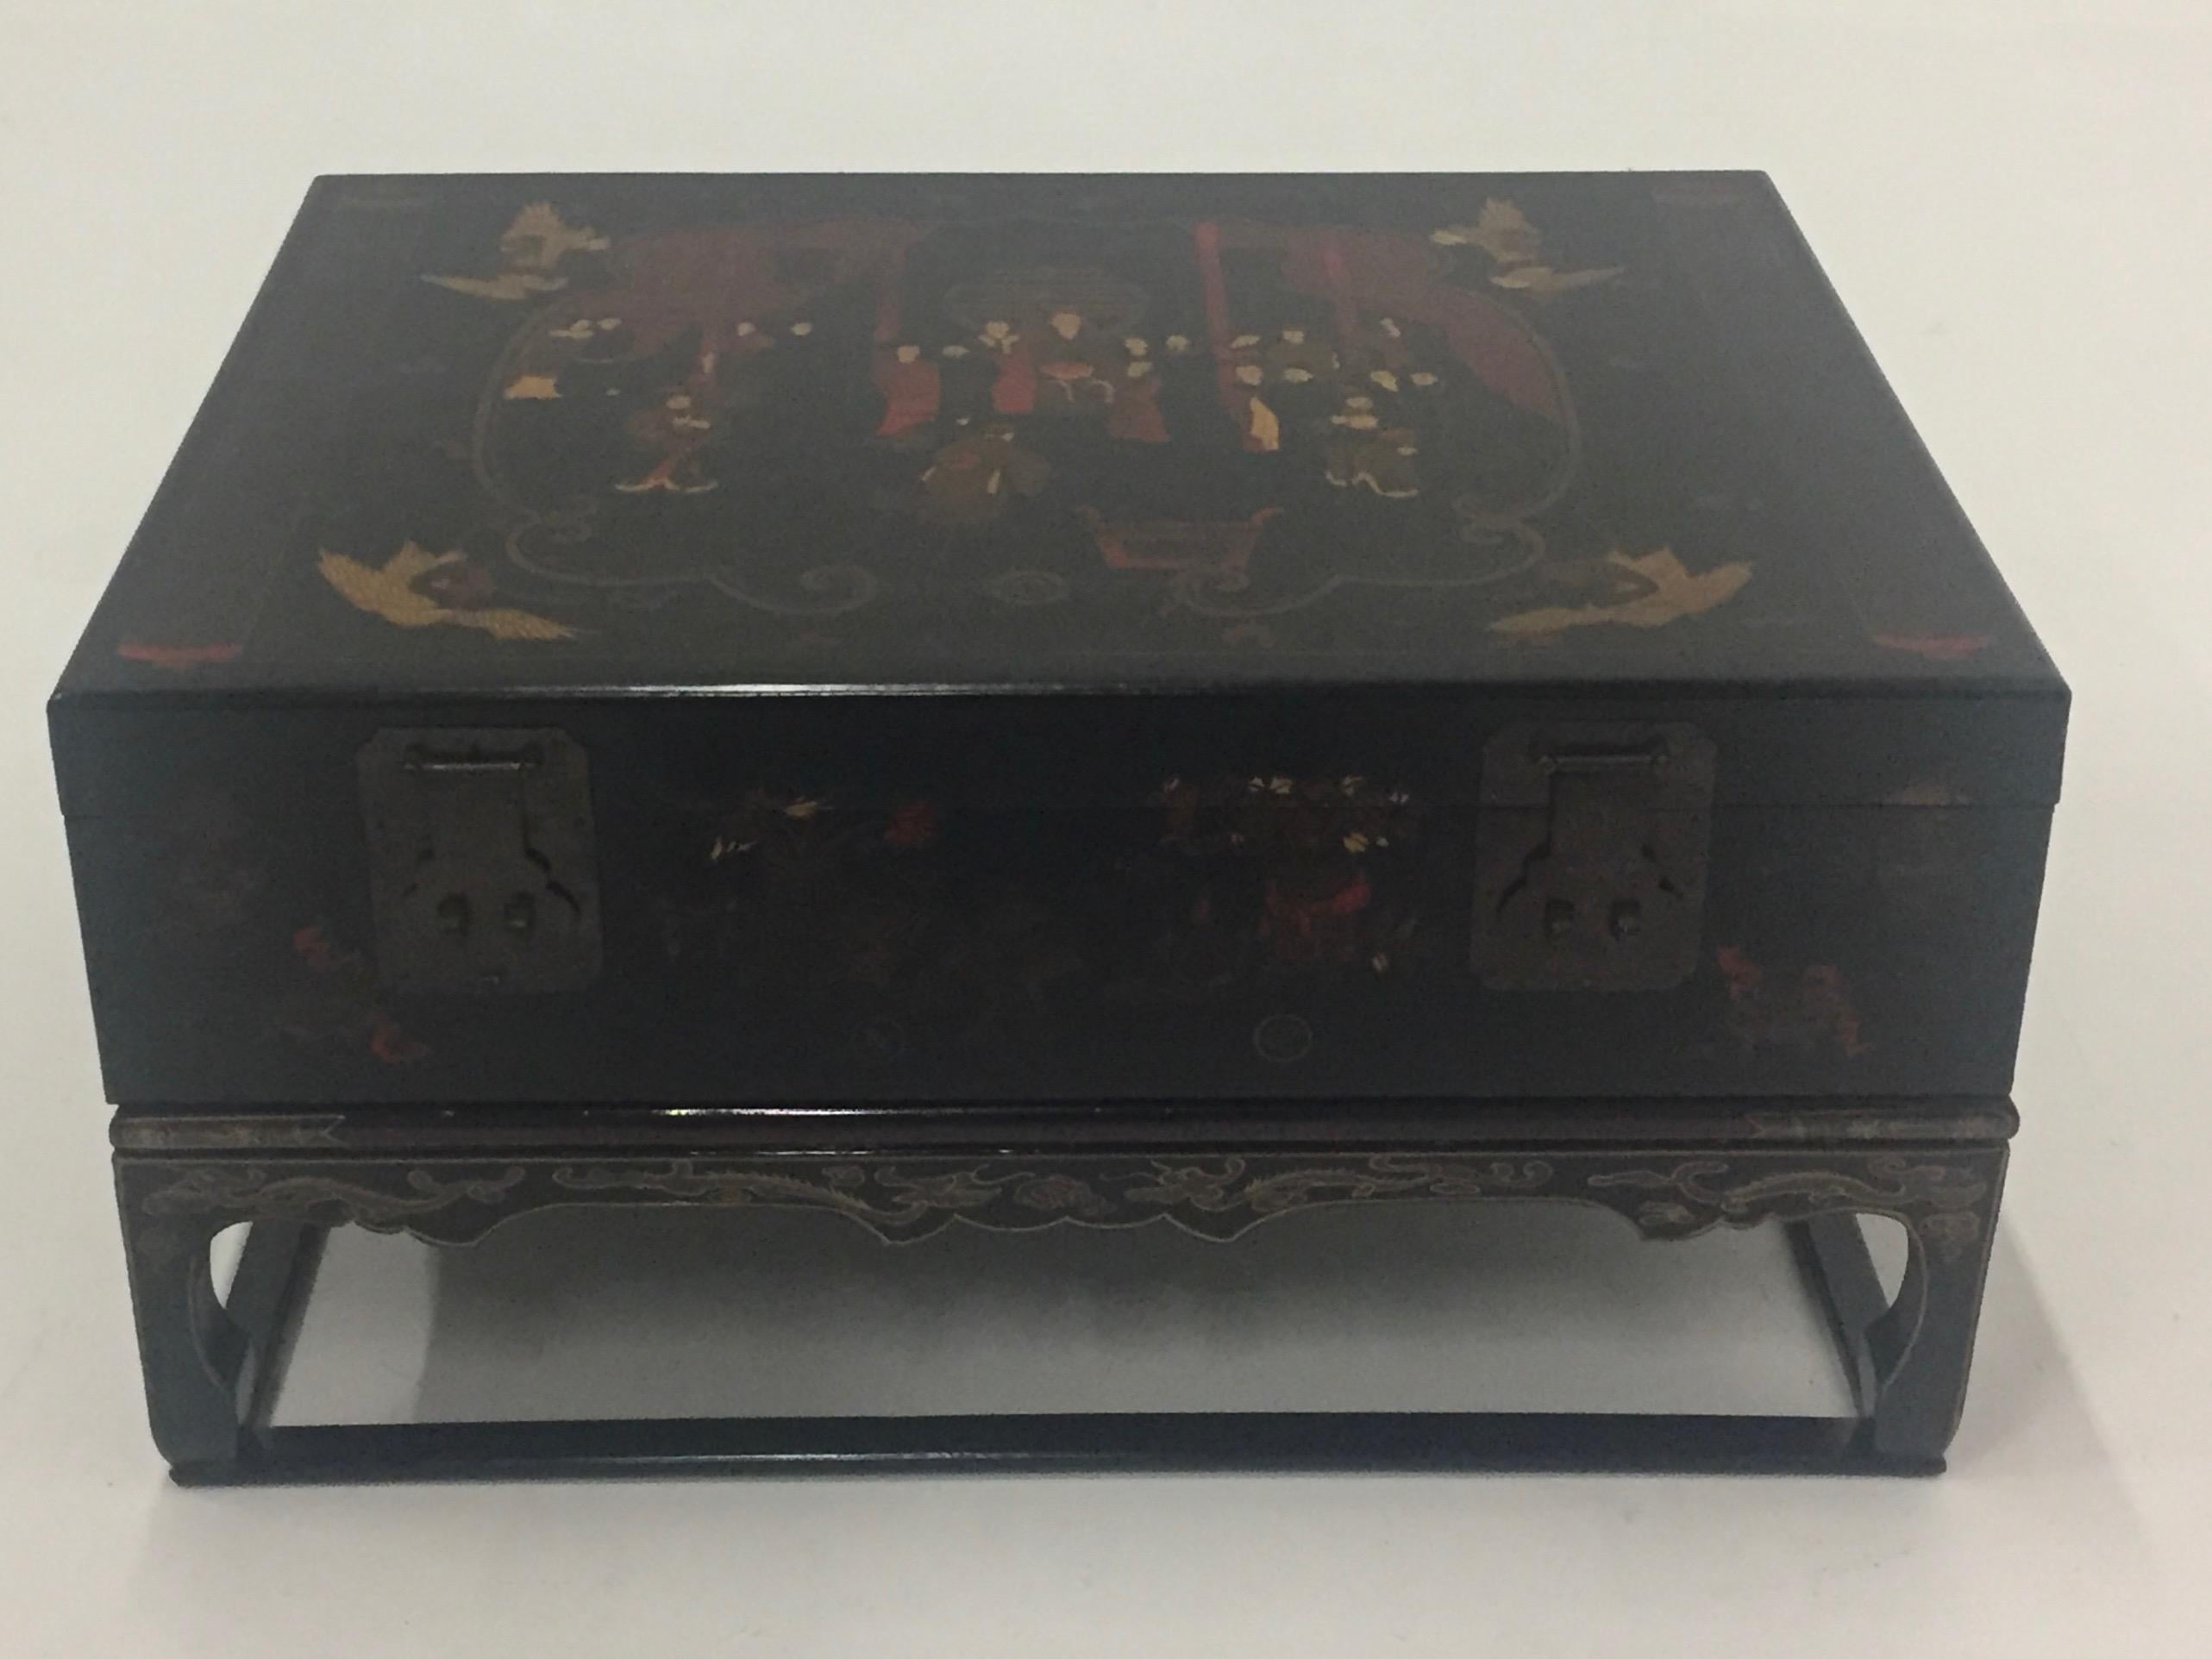 An intriguing chinoiserie coffee table in black, gold, and red having a beautifully decorated box with original hardware that sits on a custom ebonized Asian style stand. The box opens to reveal storage within and is lined with gorgeous decorative